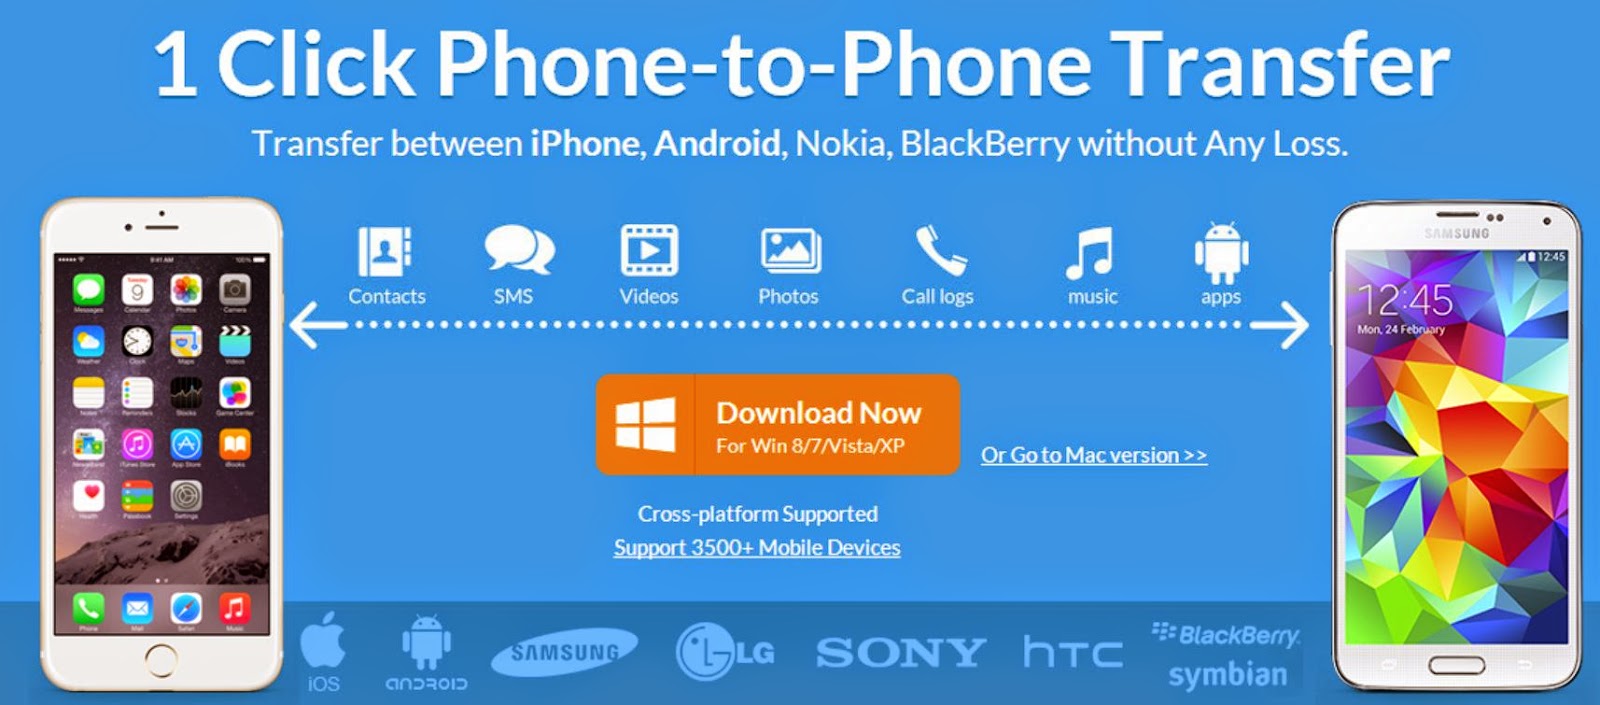 transfer files between iPhone, Android and Nokia